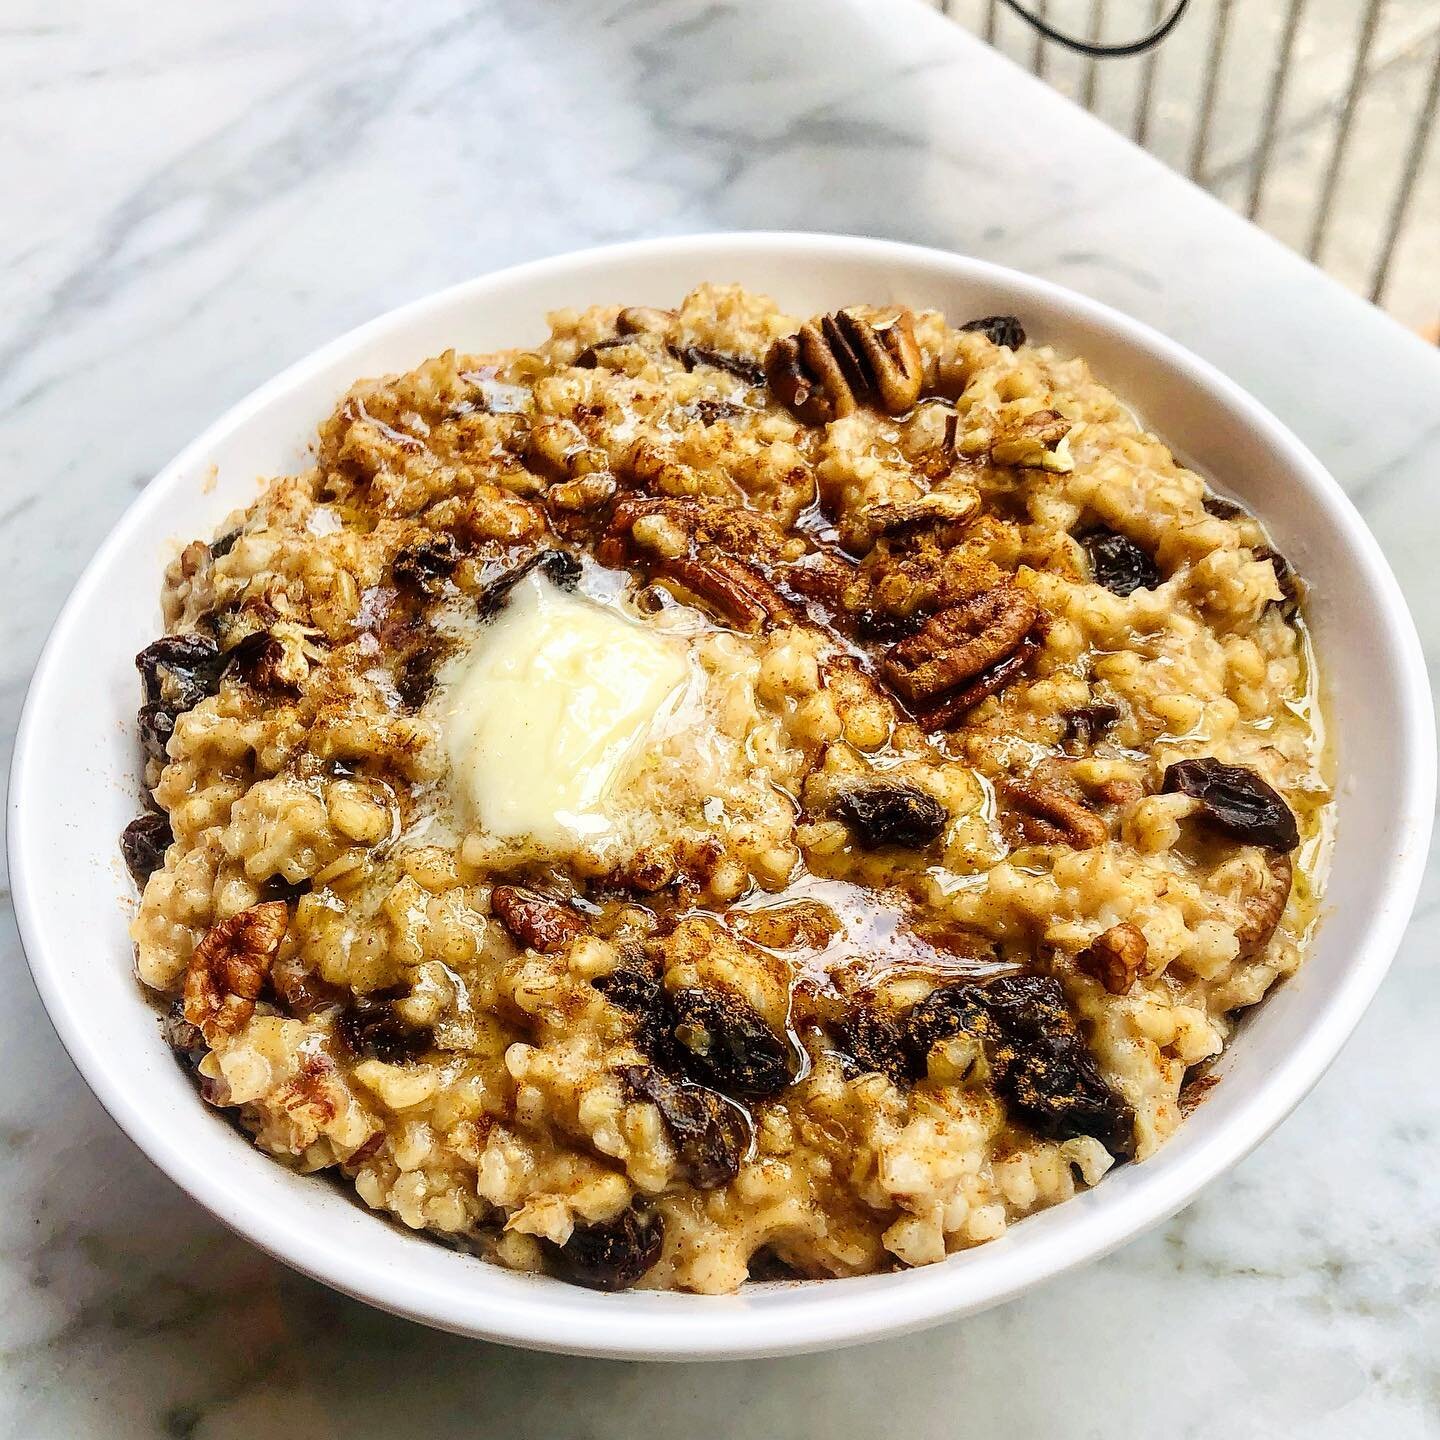 When the butter melts just right&hellip;😋
Try adding a bit of butter and a pinch of flaky sea salt to your oatmeal for a transformative experience. Paired here with dark raisins, roasted pecans, and cinnamon.